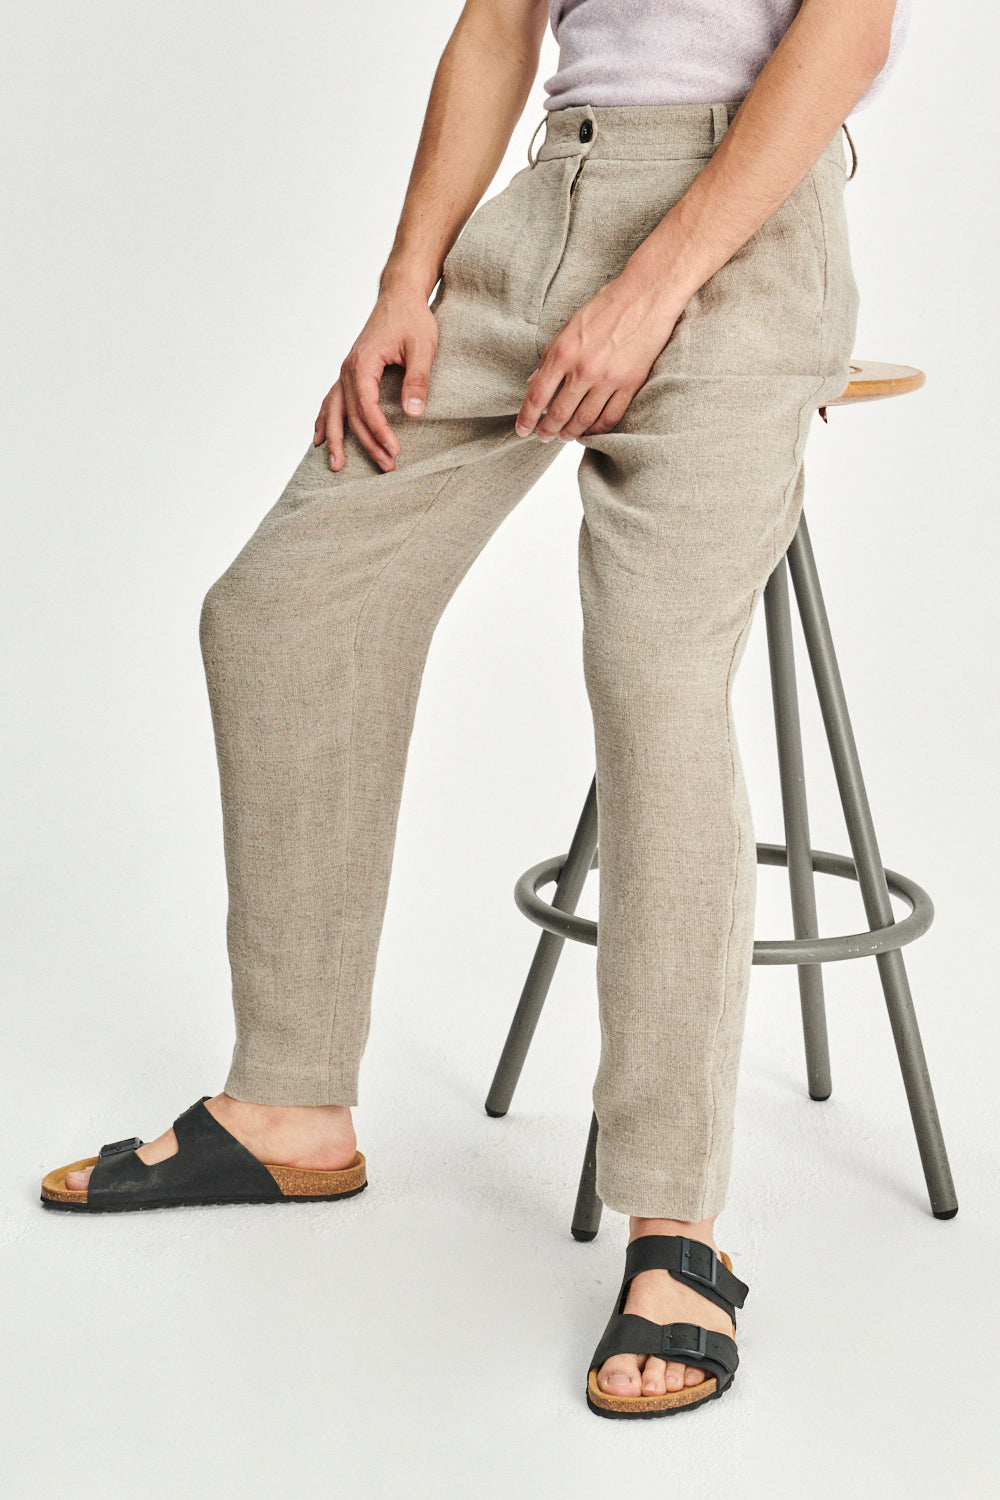 Genuine Trousers in a Beige Fluid and Structured Italian Linen Crepe